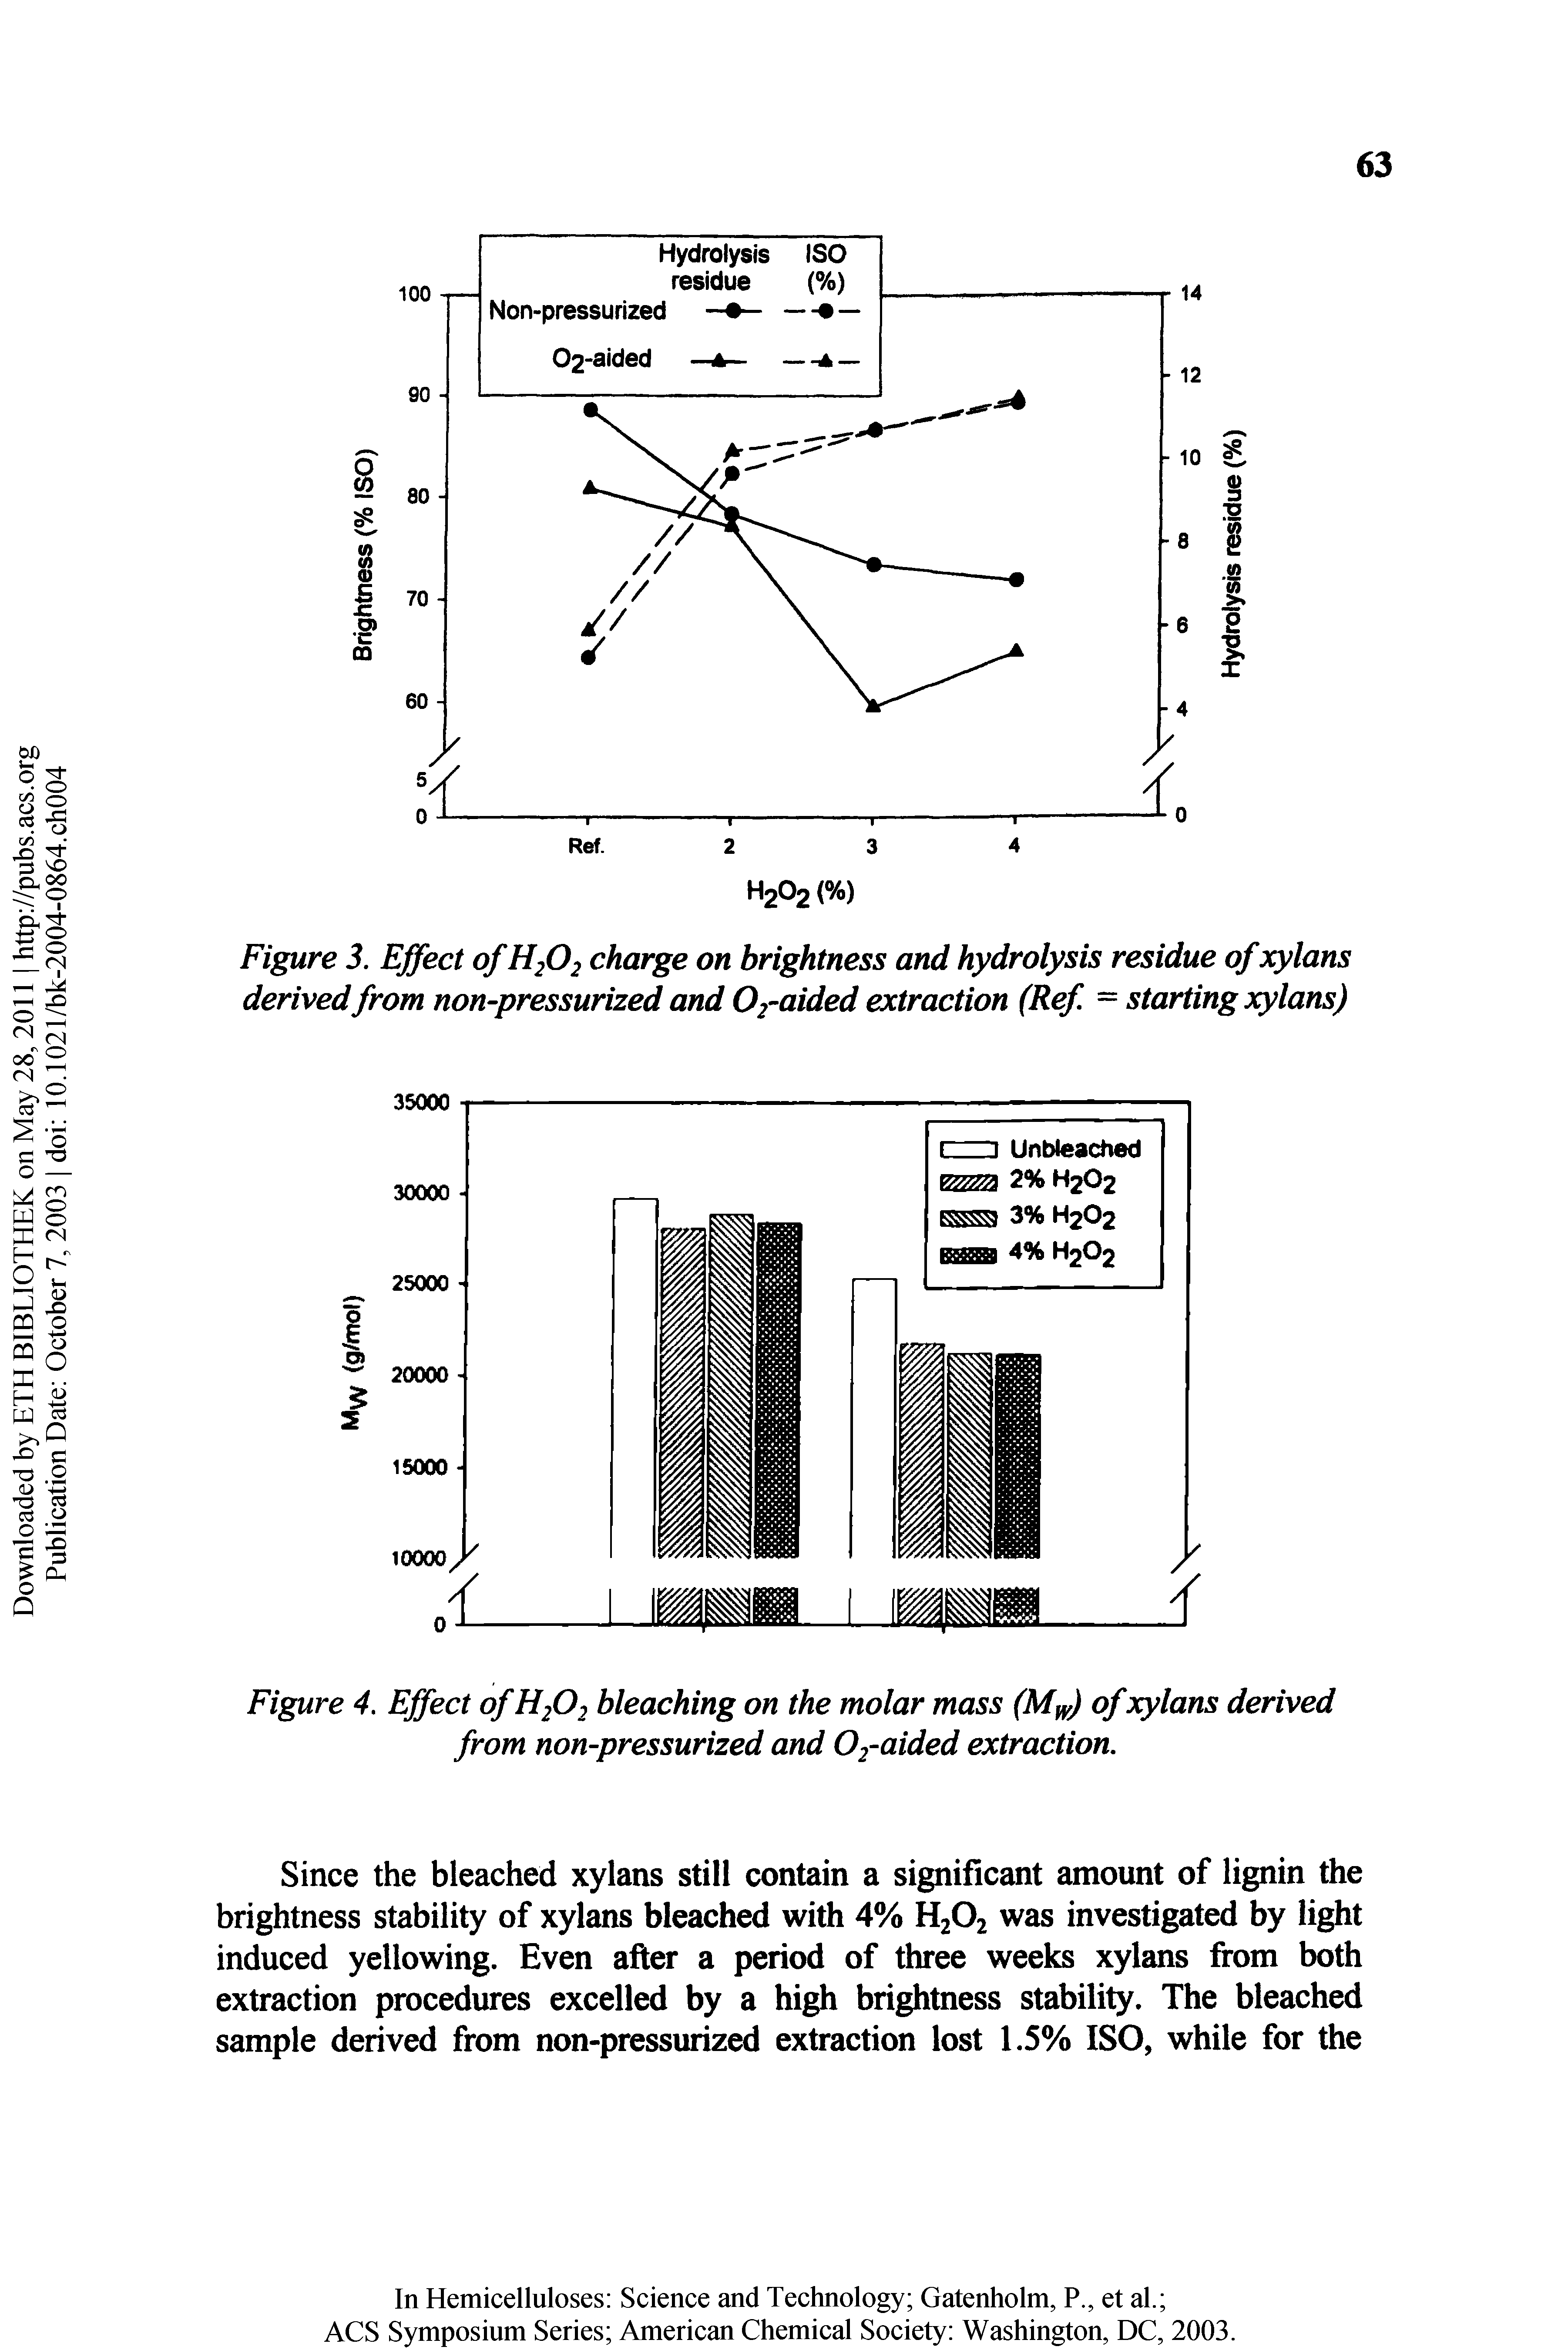 Figure 3. Effect of H2O2 charge on brightness and hydrolysis residue of xylans derived from non-pressurized and 02-aided extraction (Ref = starting xylans)...